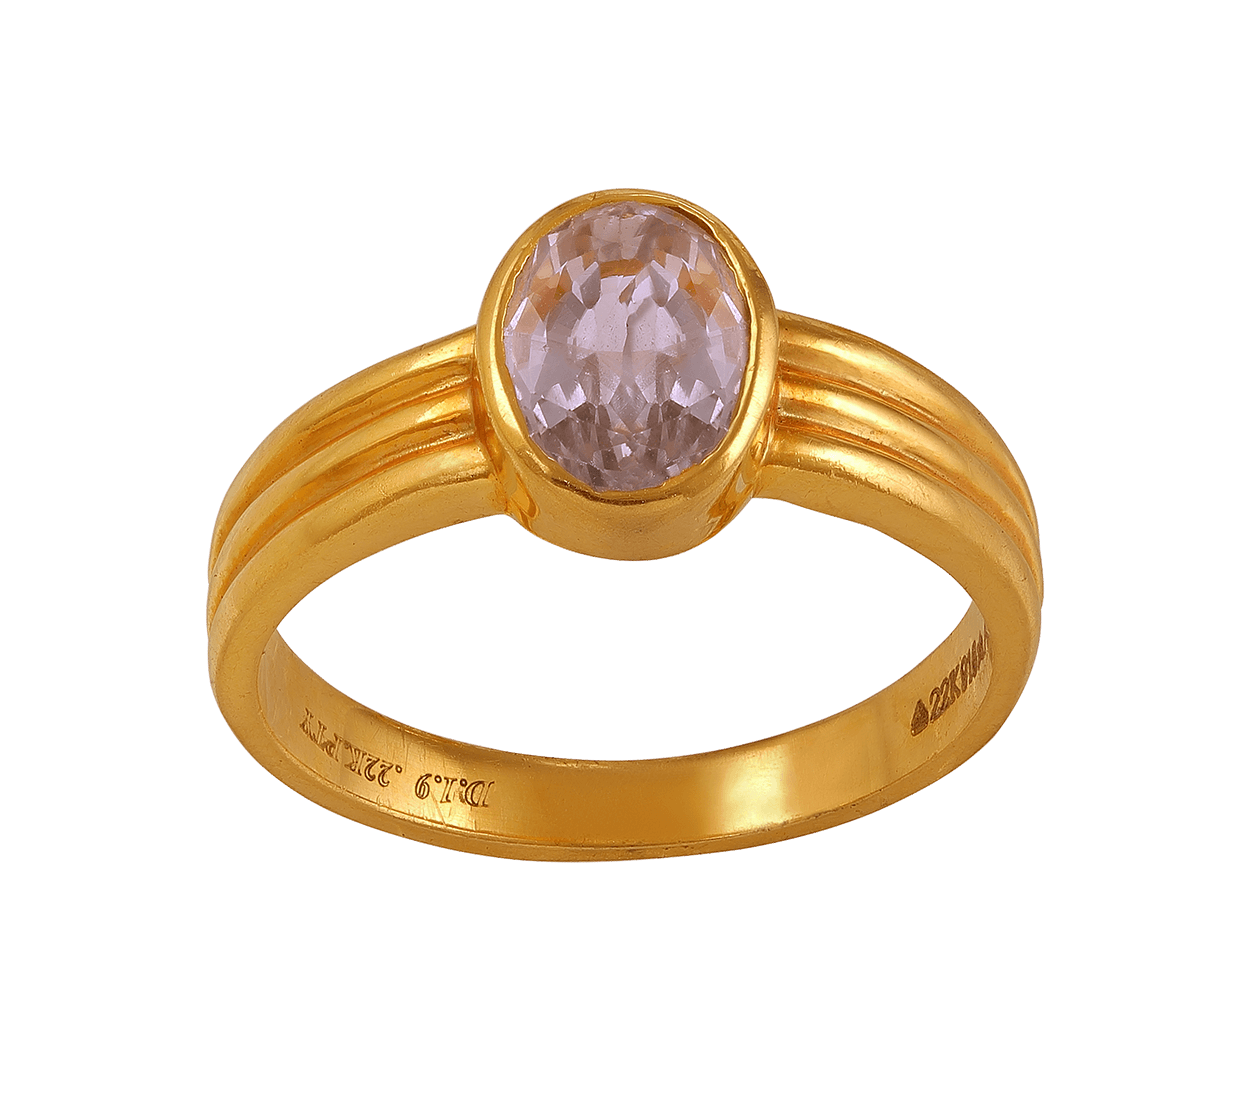 3.01ct Grey Spinel Three Stone Ring in 14k Rose Gold – Anueva Jewelry